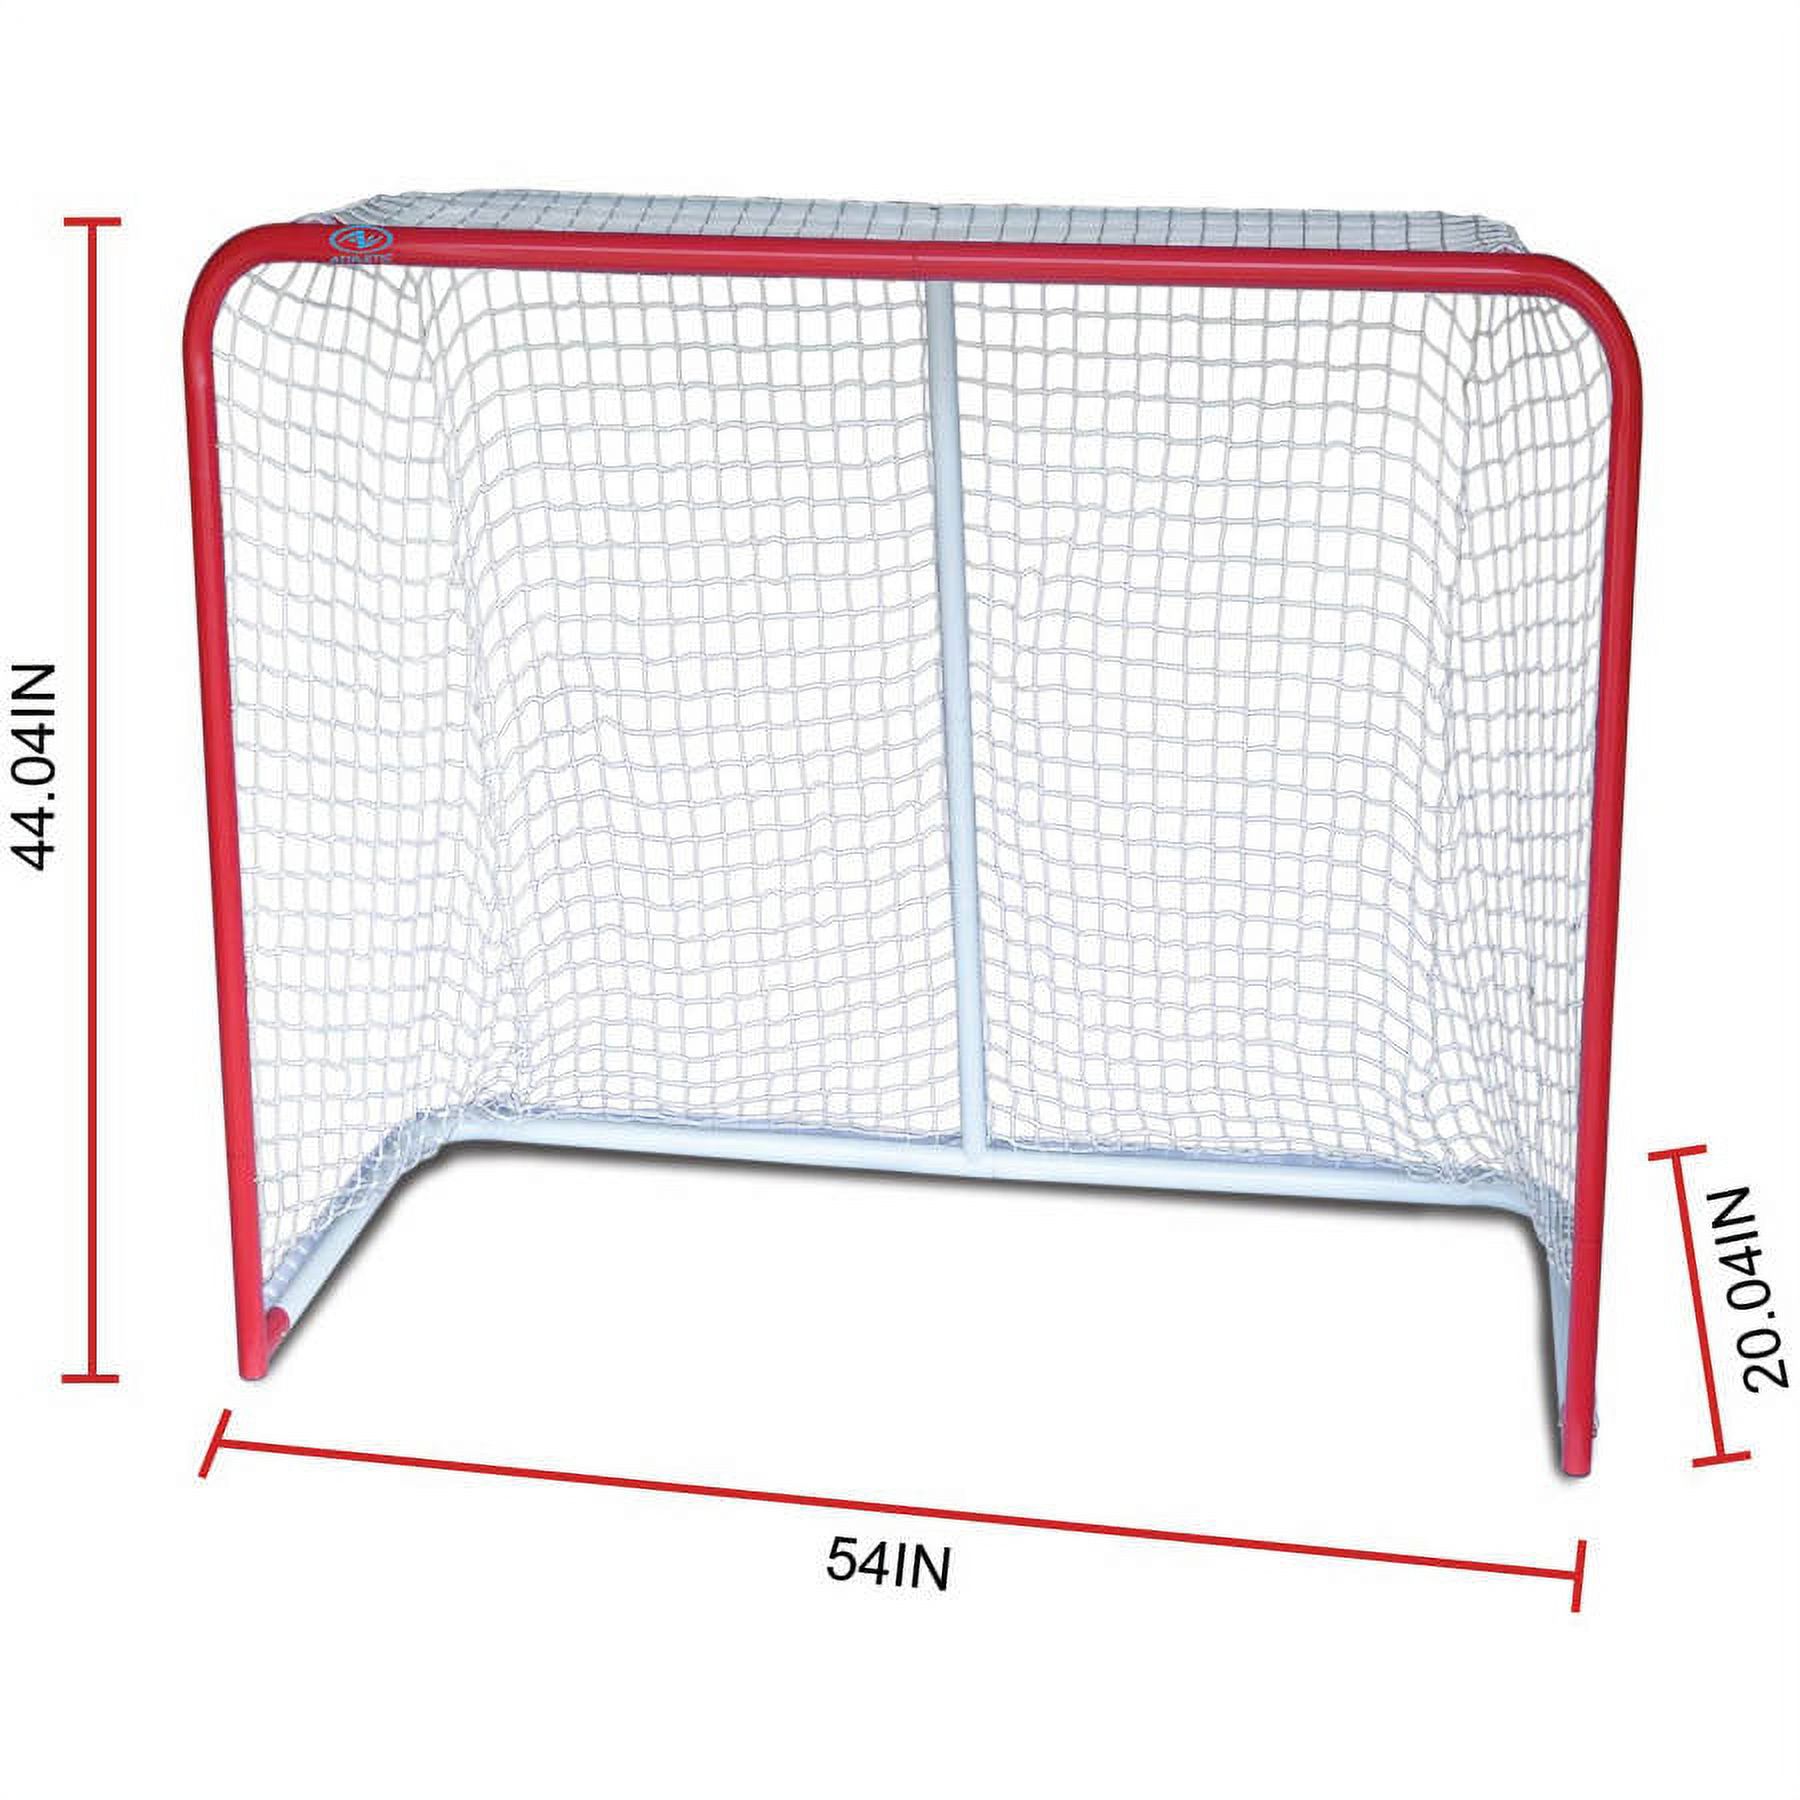 Athletic Works 54" Indoor/Outdoor Steel Hockey Goal with Polyester Net - image 2 of 2